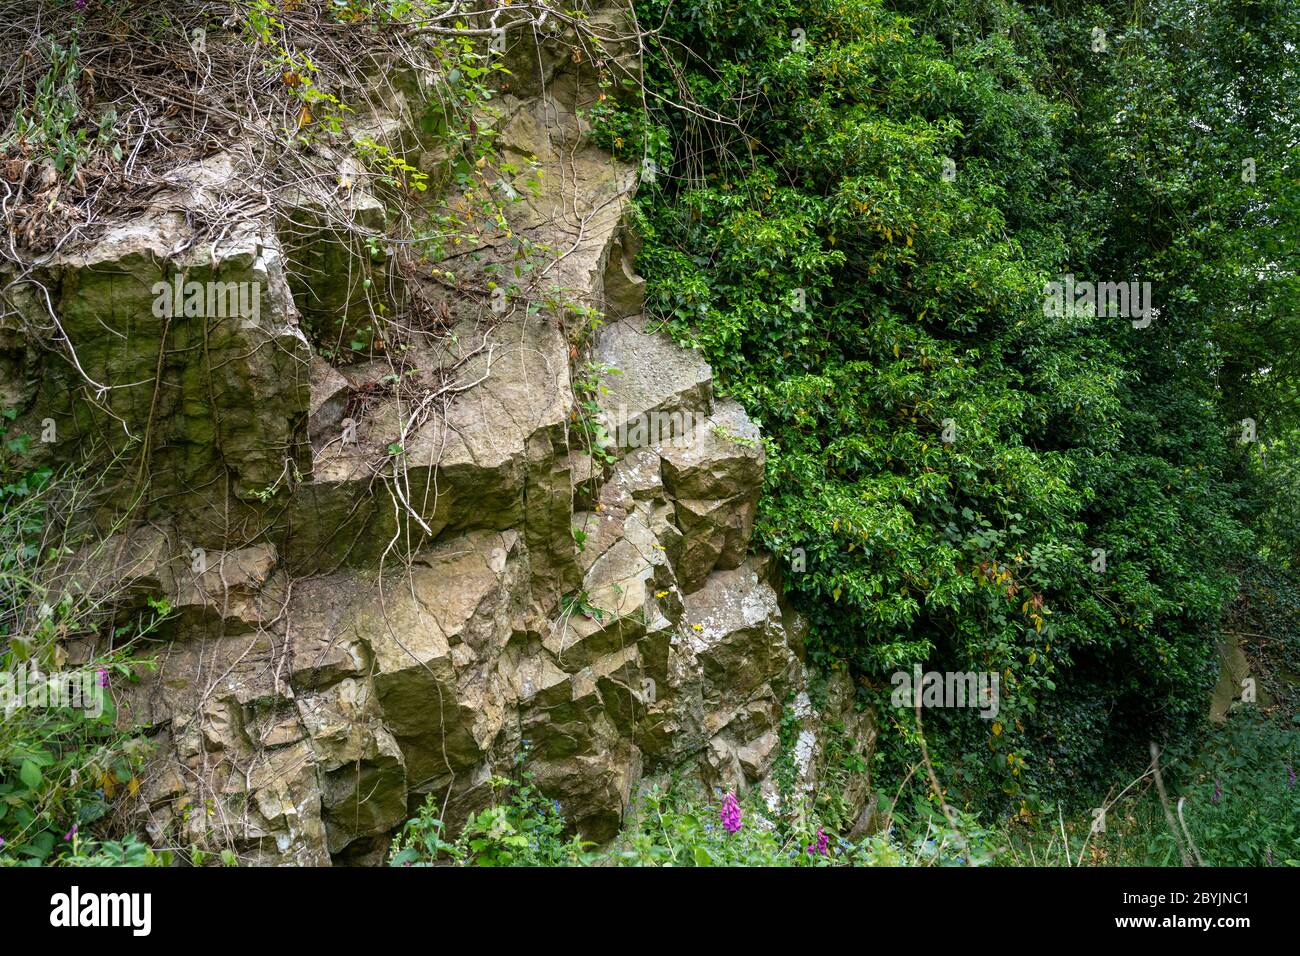 Overgrown rock face in a dissused quarry in the UK. Stock Photo